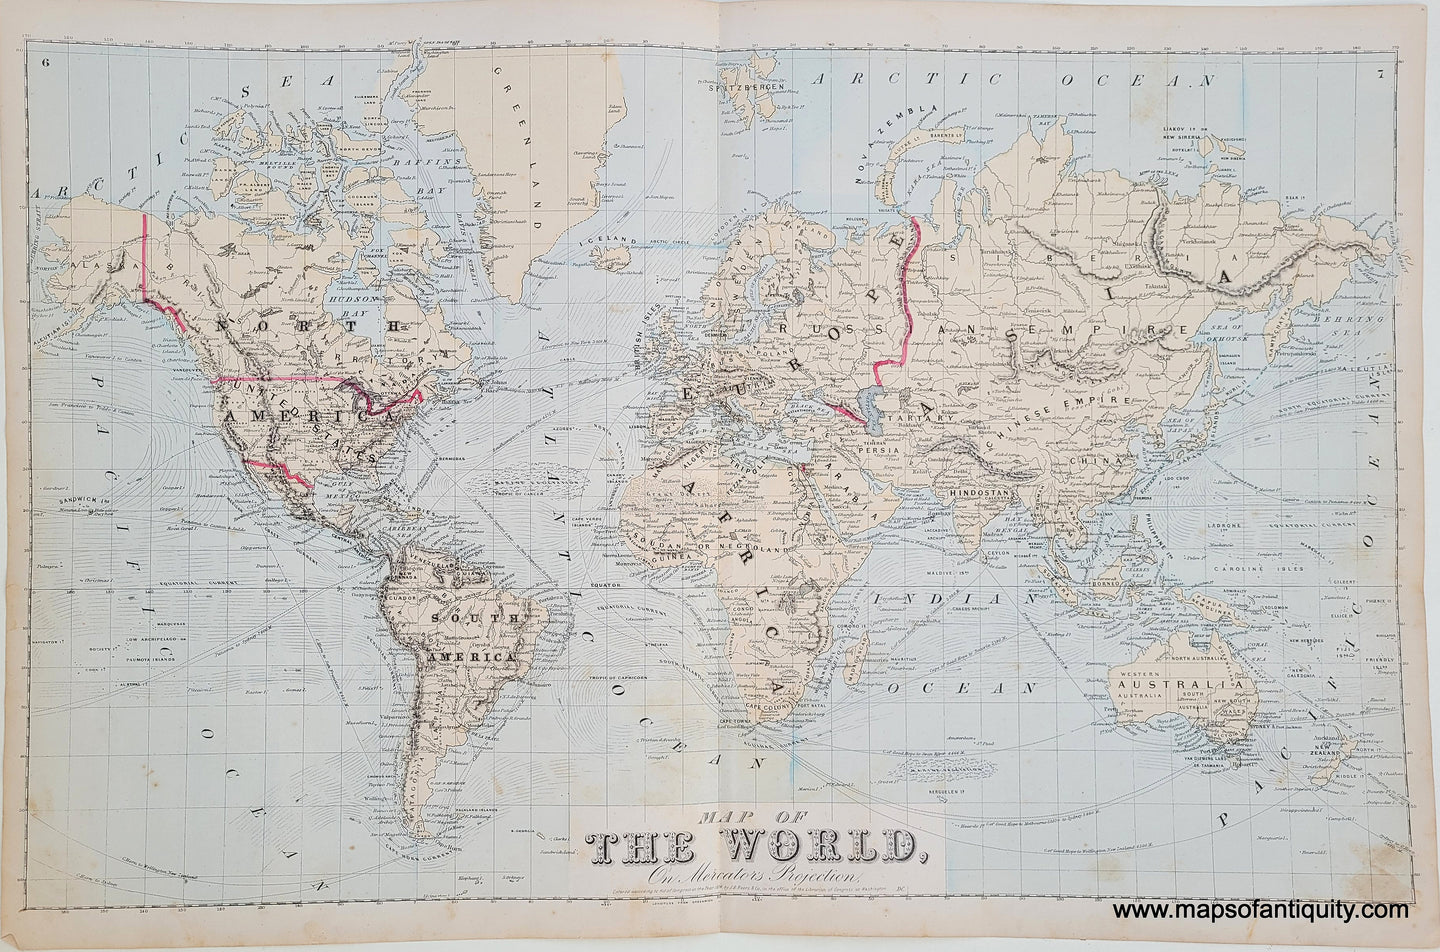 Antique-Hand-Colored-Map-Map-of-the-World-on-Mercator's-Projection-**********-World--1875-Beers-Maps-Of-Antiquity